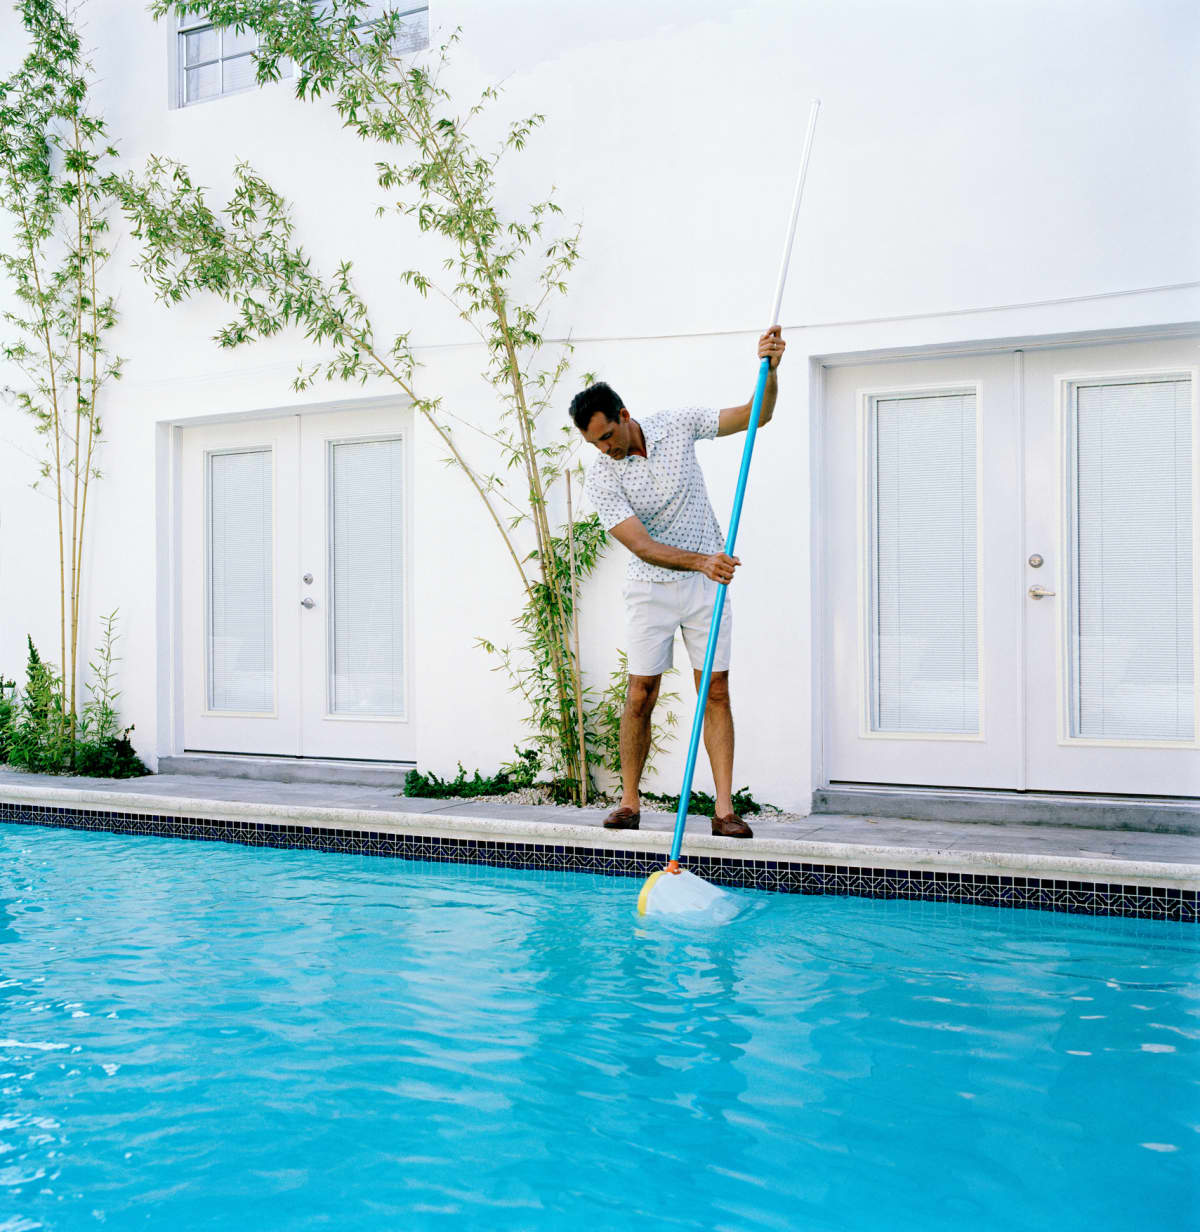 A man cleaning a pool with a telescopic pole